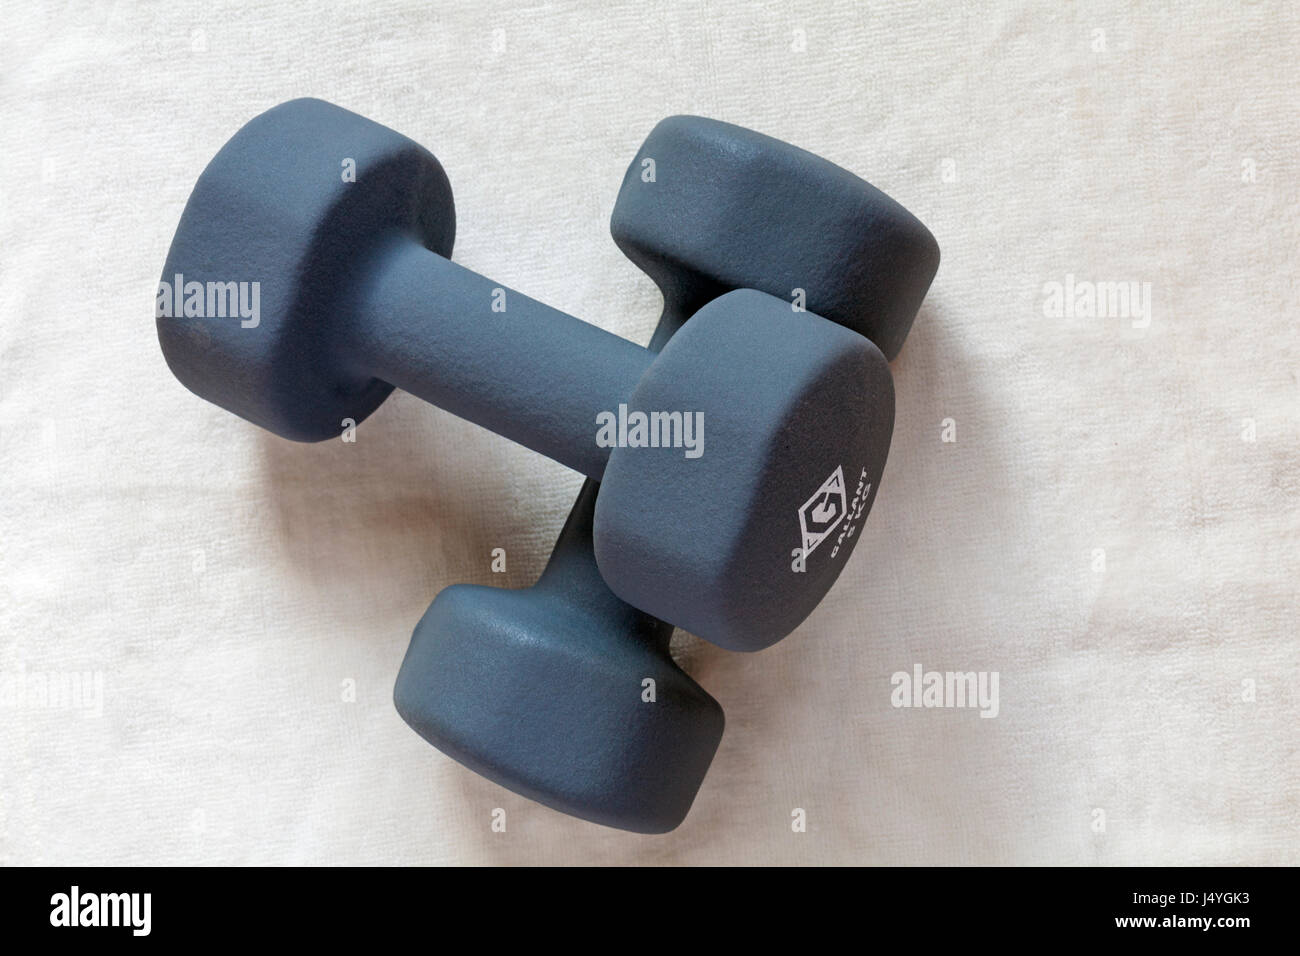 Pair of grey Gallant Hand Weights each weighing 5kg x 2 = 10kg resting on cream towel Stock Photo